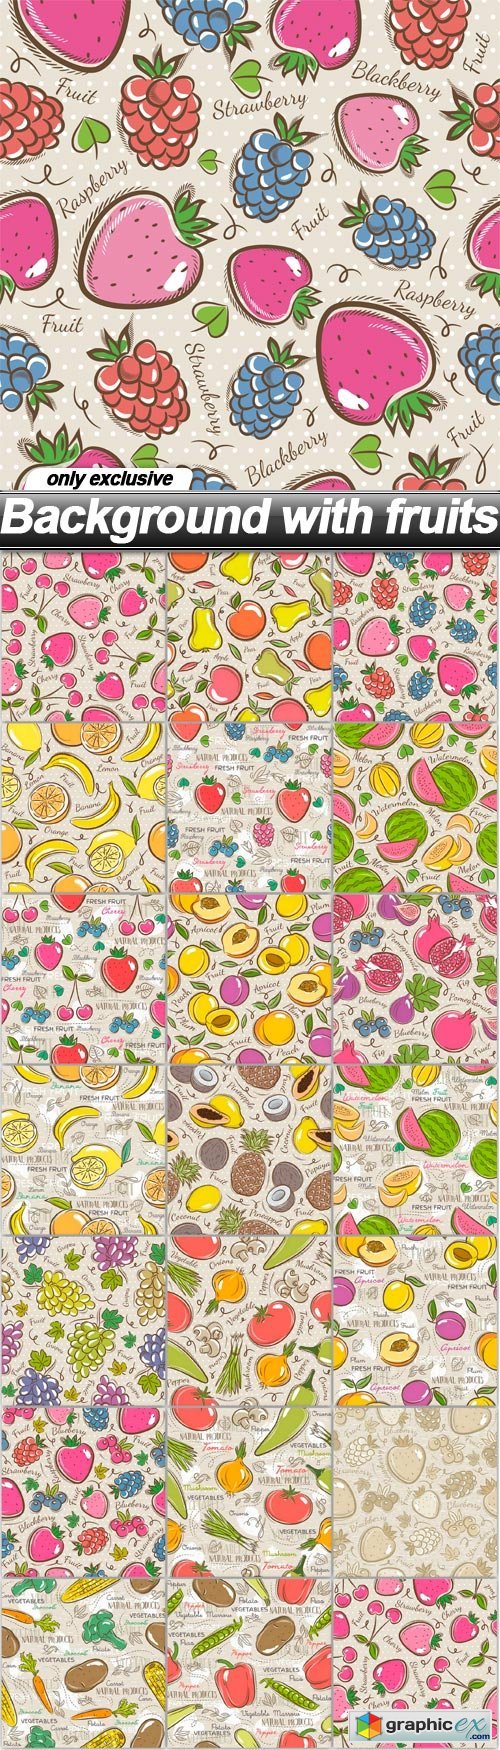 Background with fruits - 20 EPS